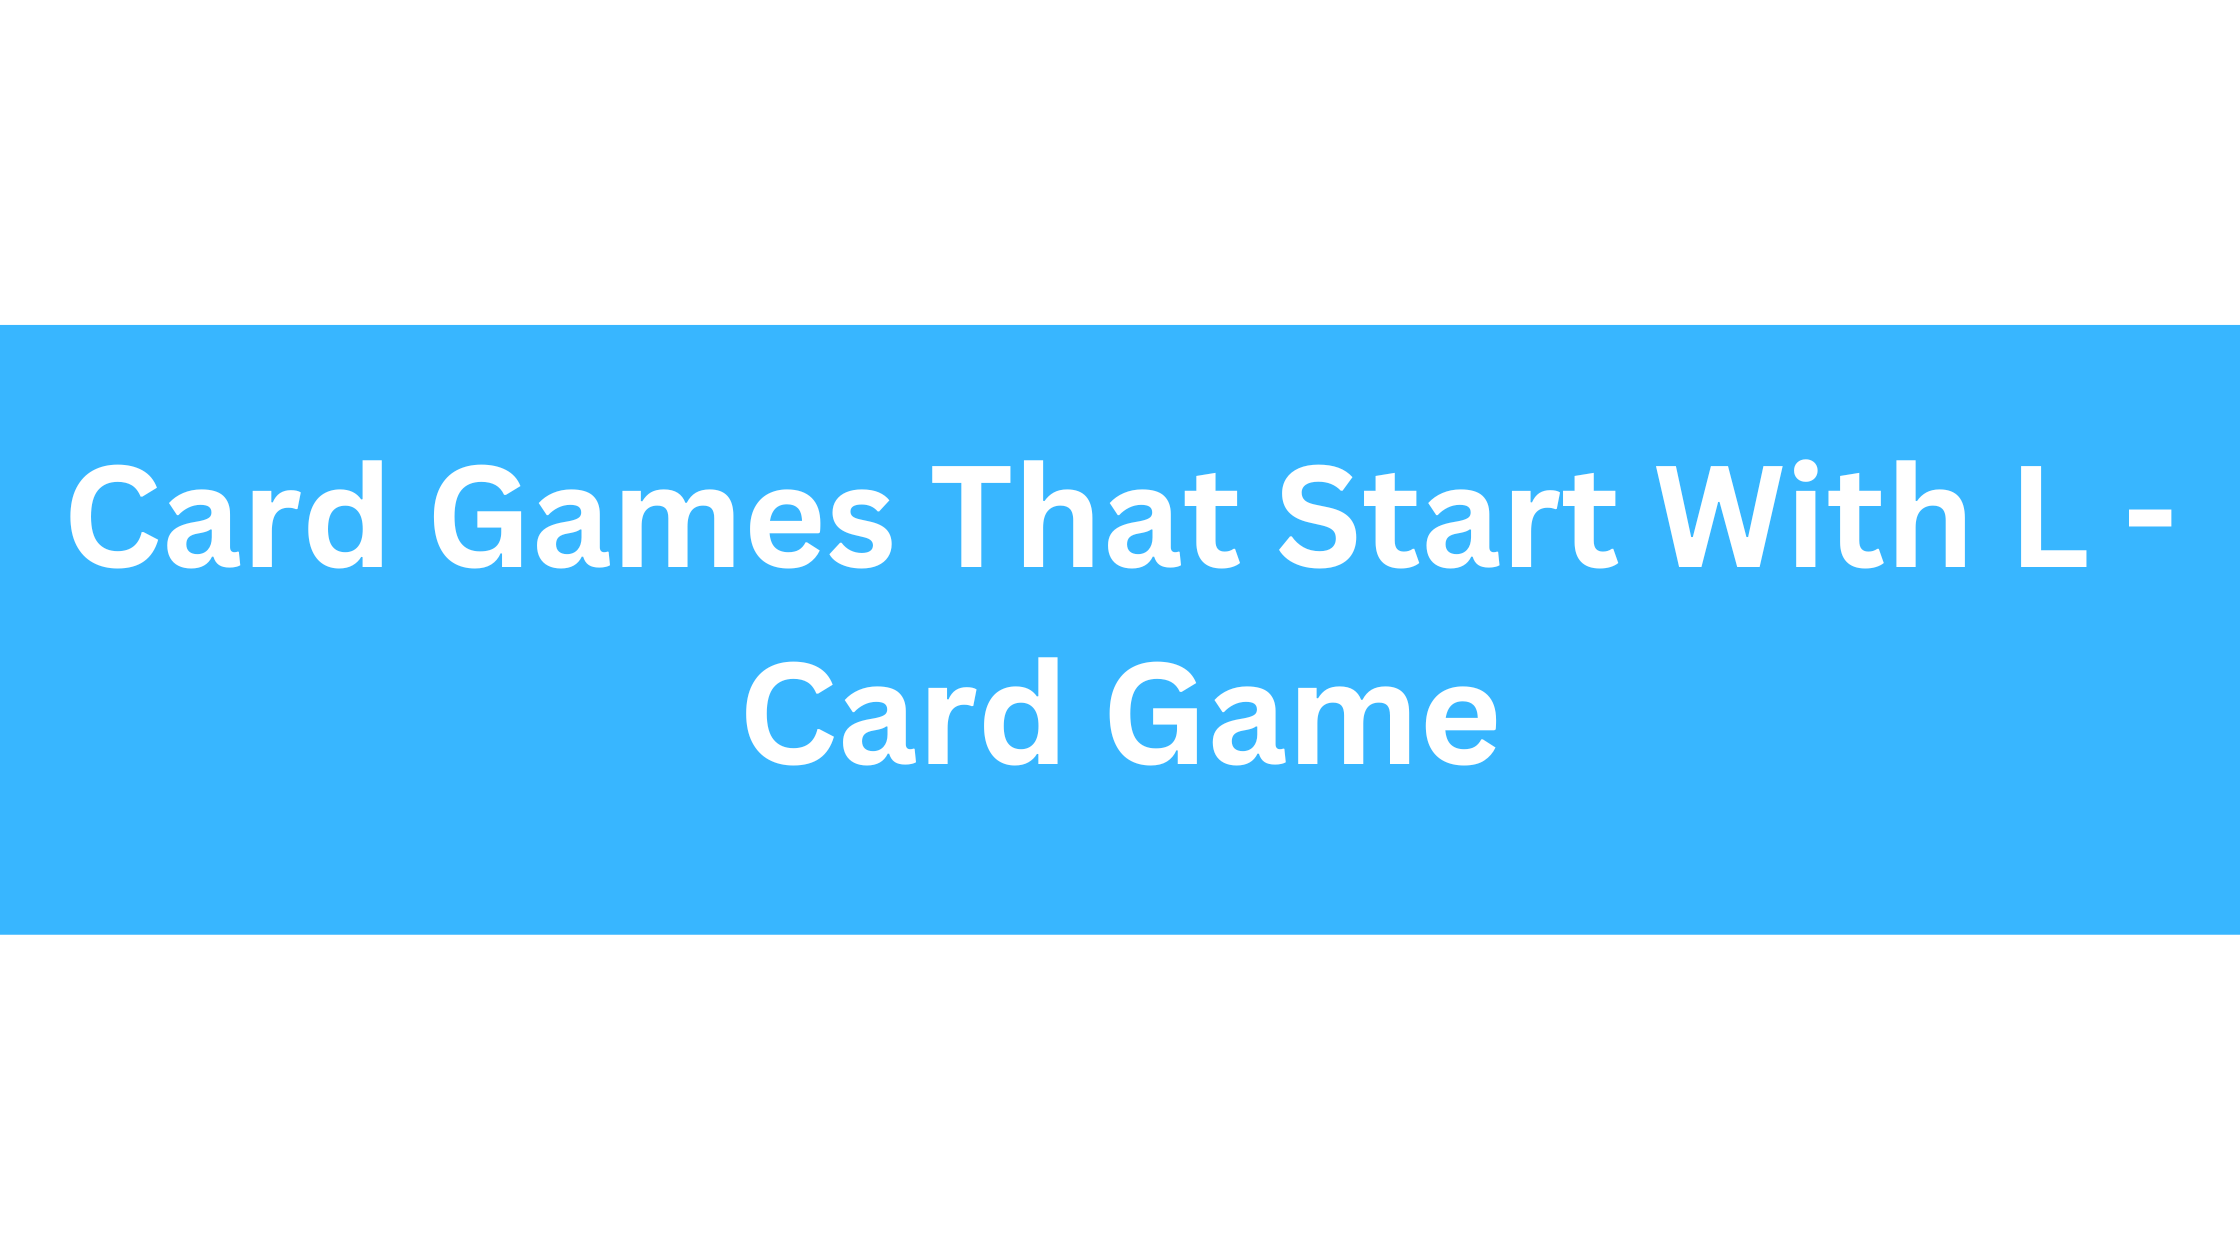 Card Games That Start With L